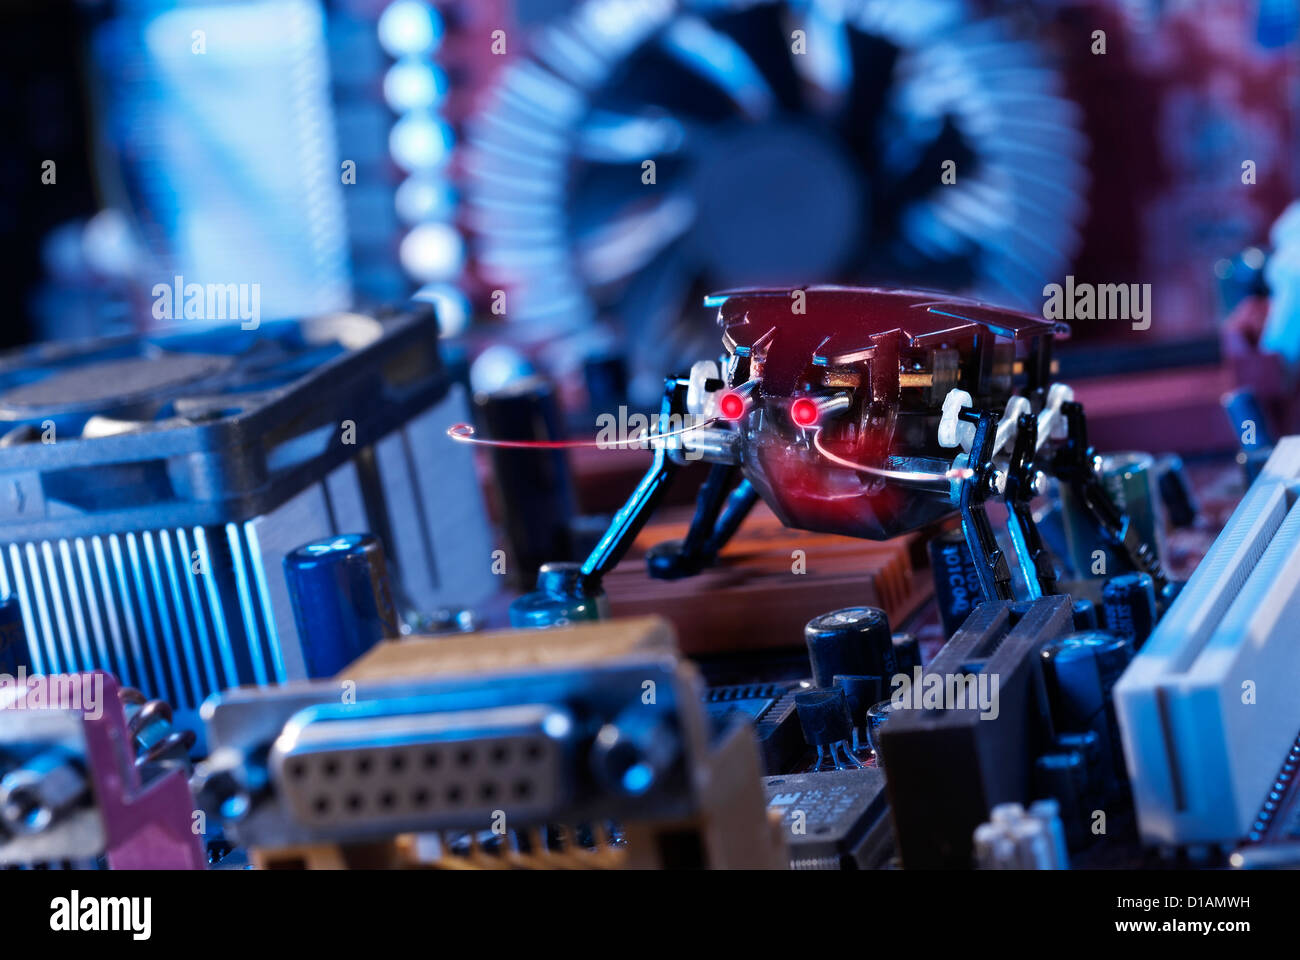 A robot beetle with red glowing eyes on a motherboard. Stock Photo